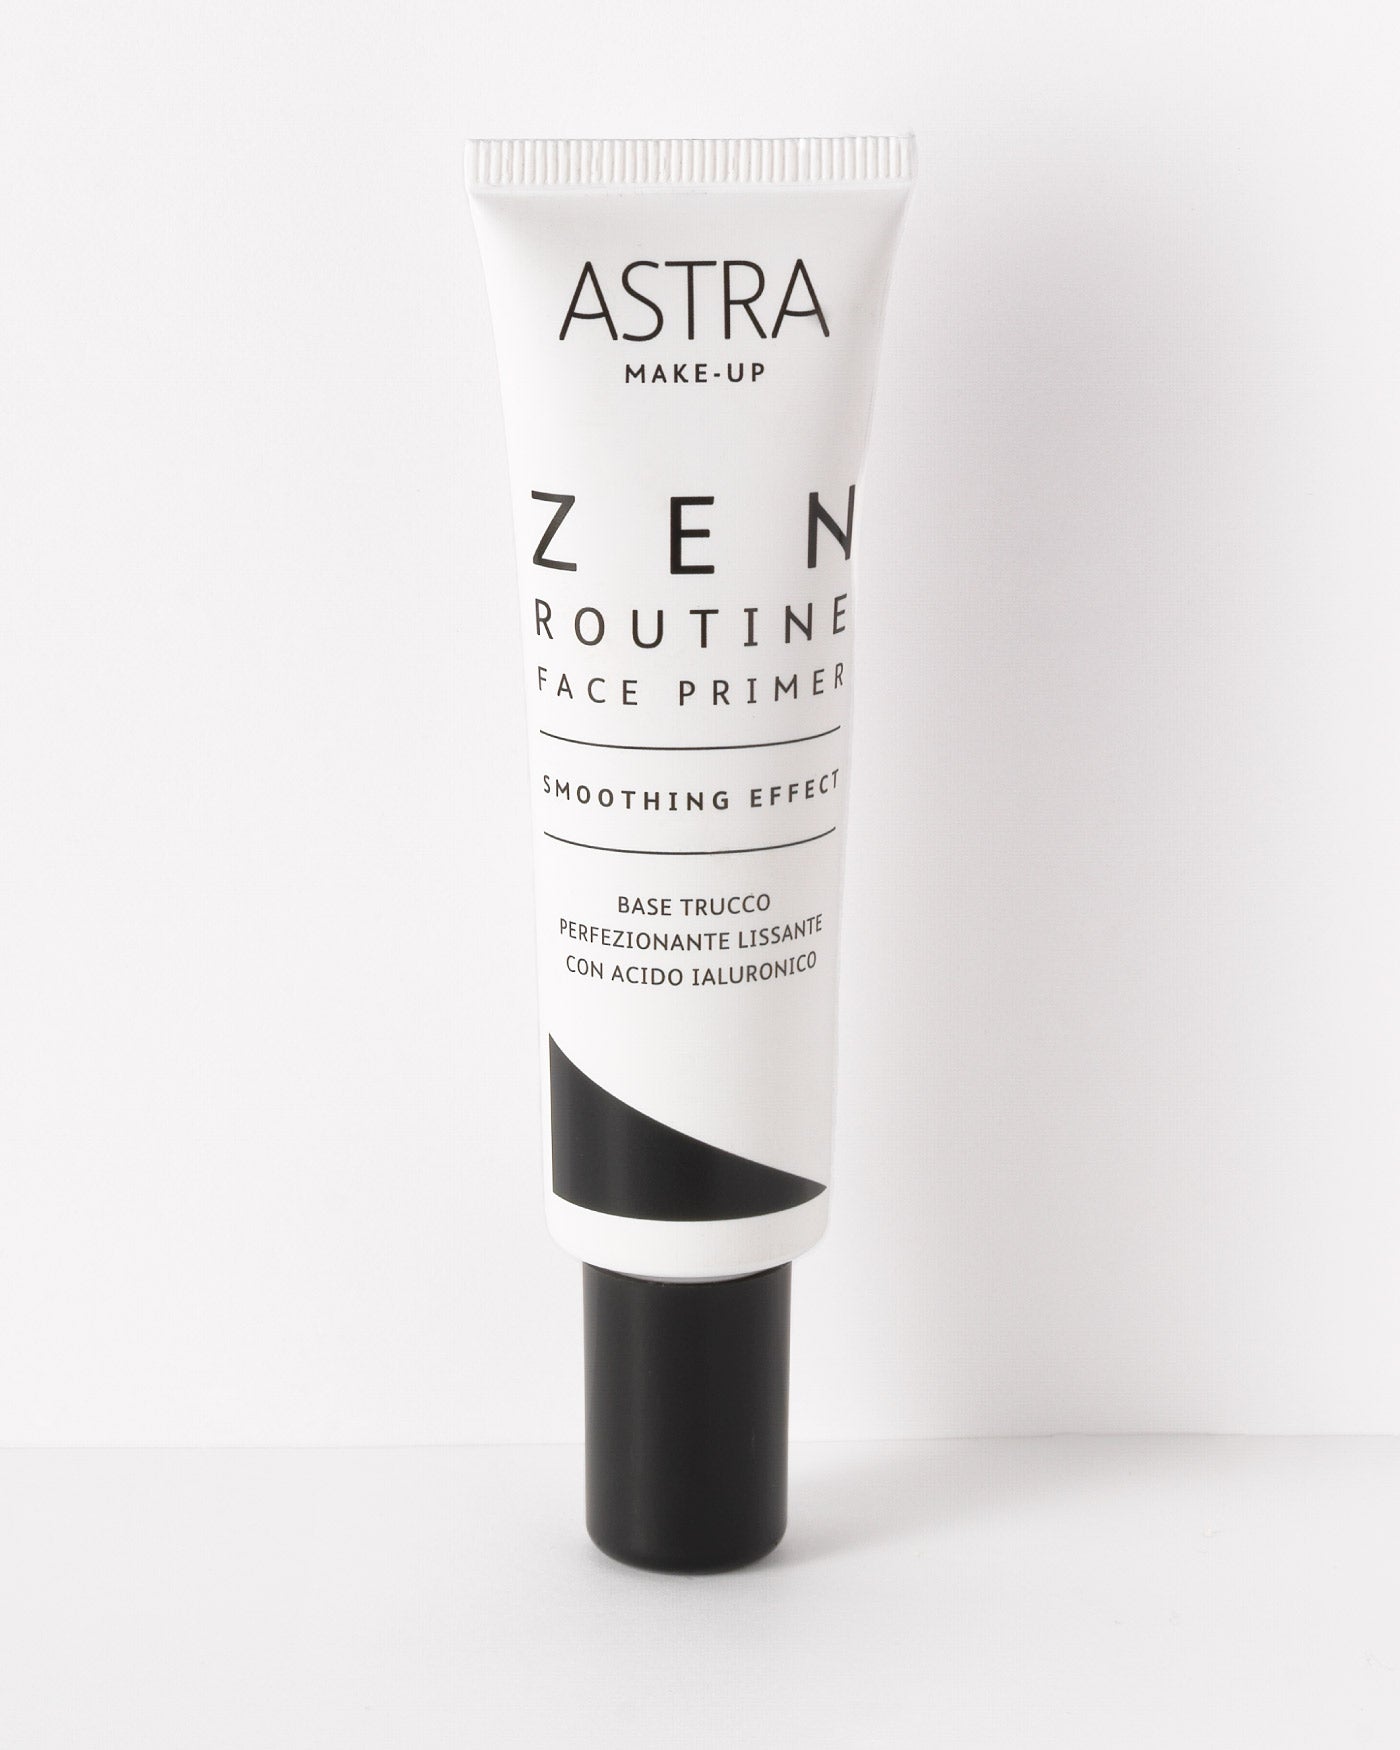 ZEN ROUTINE FACE PRIMER SMOOTHING EFFECT - Primer & Fixing - Astra Make-Up